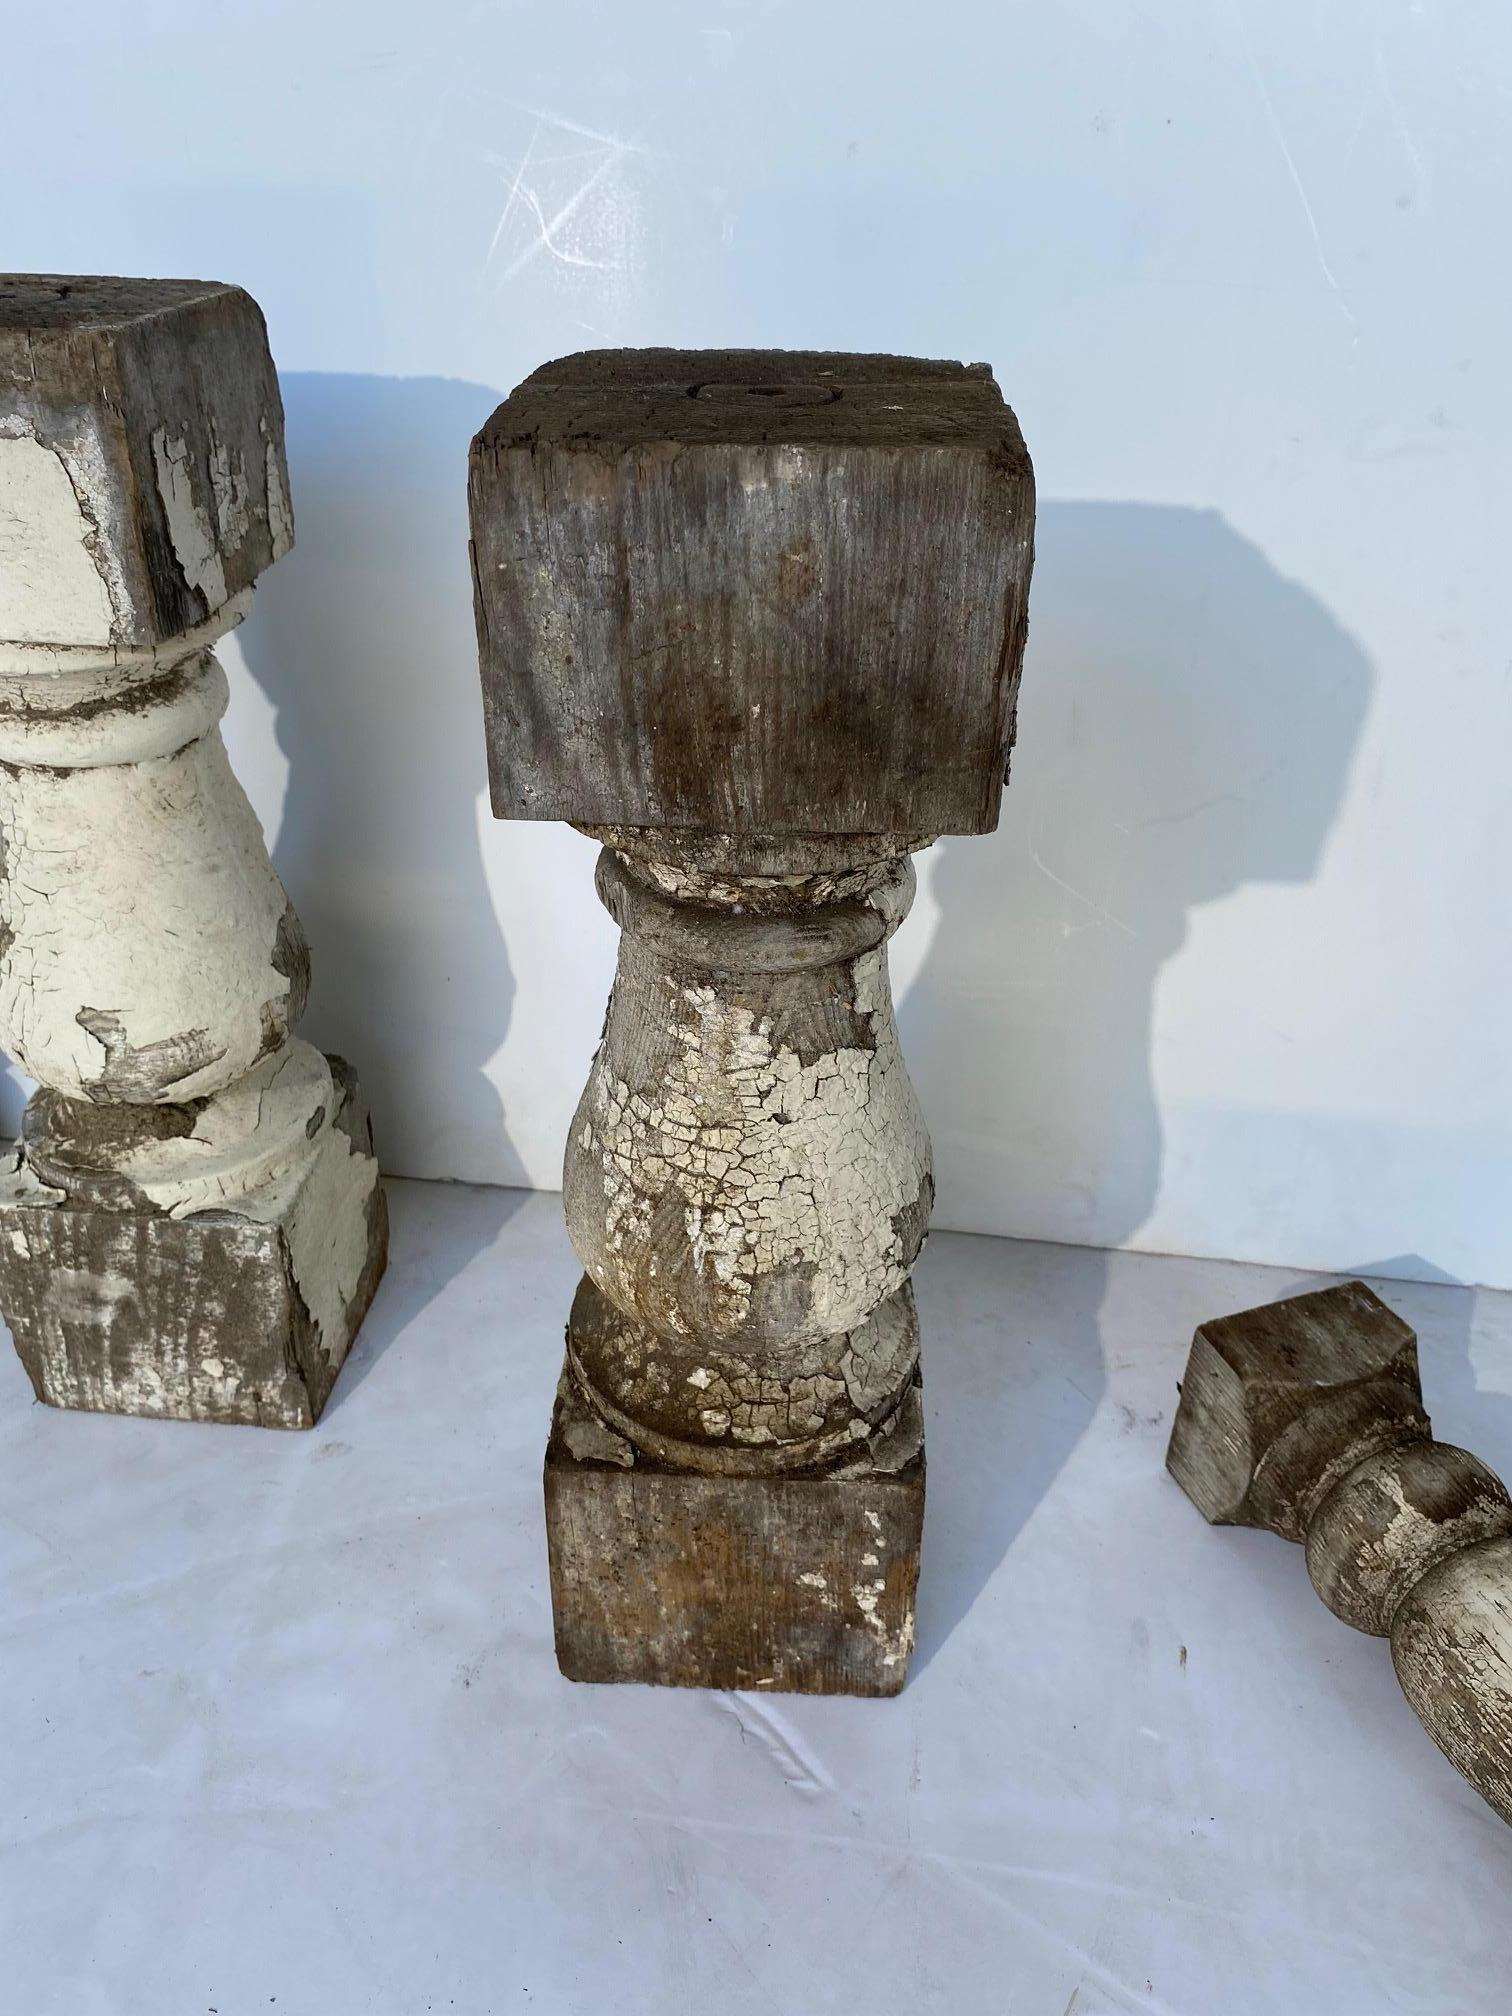 19th-century French architectural fragments. Five pieces. The finial is 6